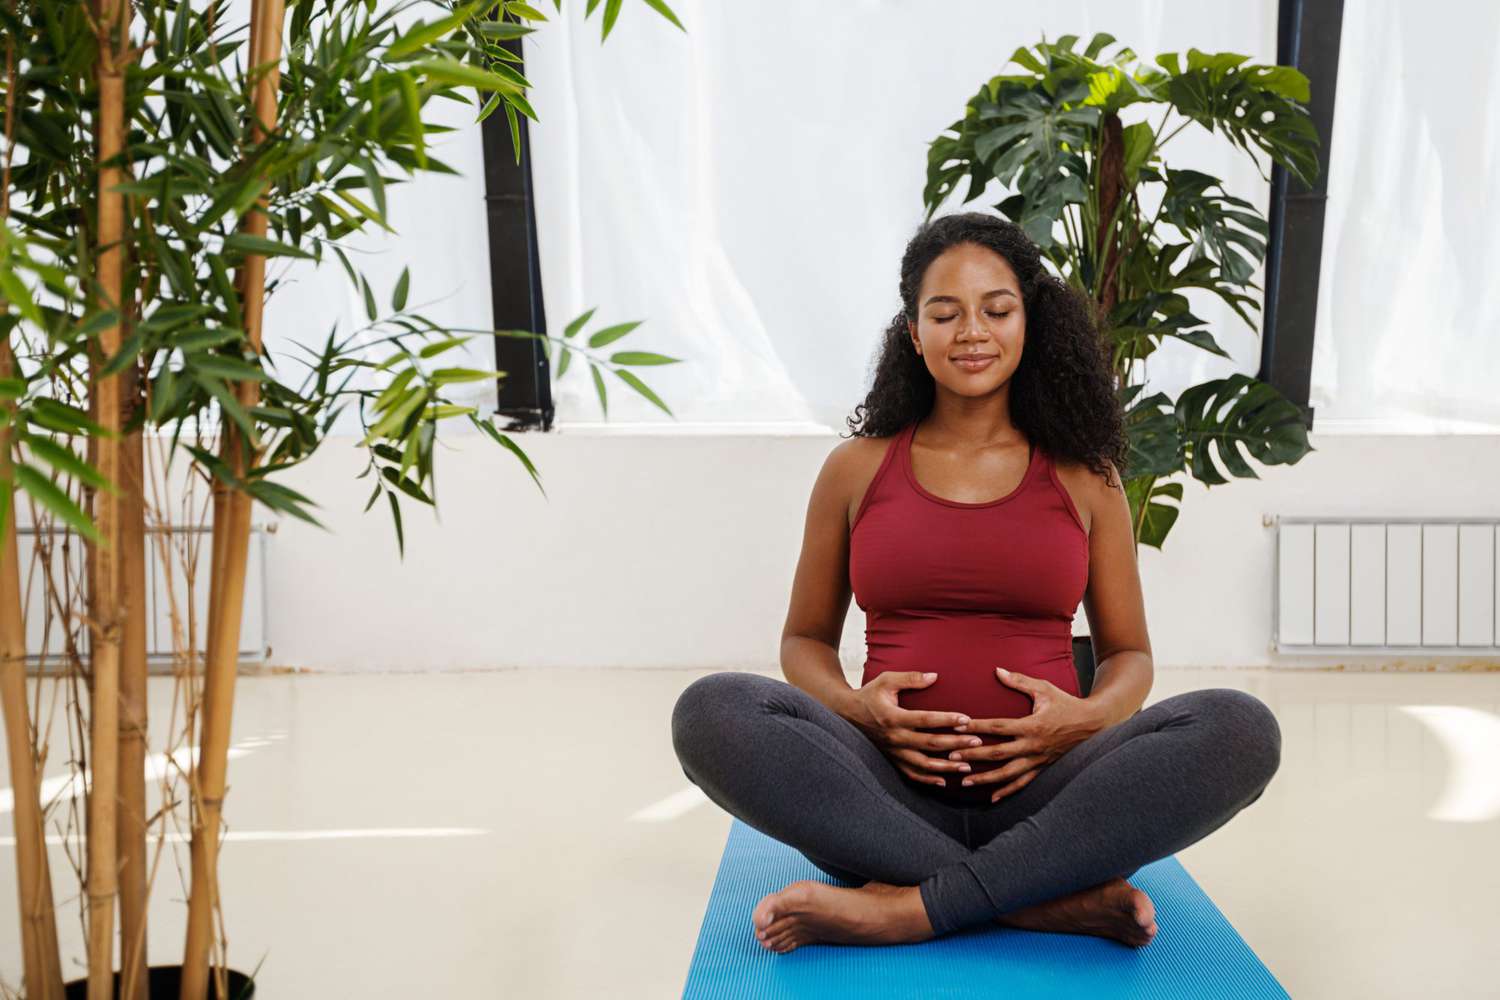 Stay active at home during pregnancy with our tips and tricks. Discover safe and effective exercises, routines, and expert advice to maintain fitness and well-being without leaving your home. Embrace a healthy lifestyle for you and your baby, all from the comfort of your own space.